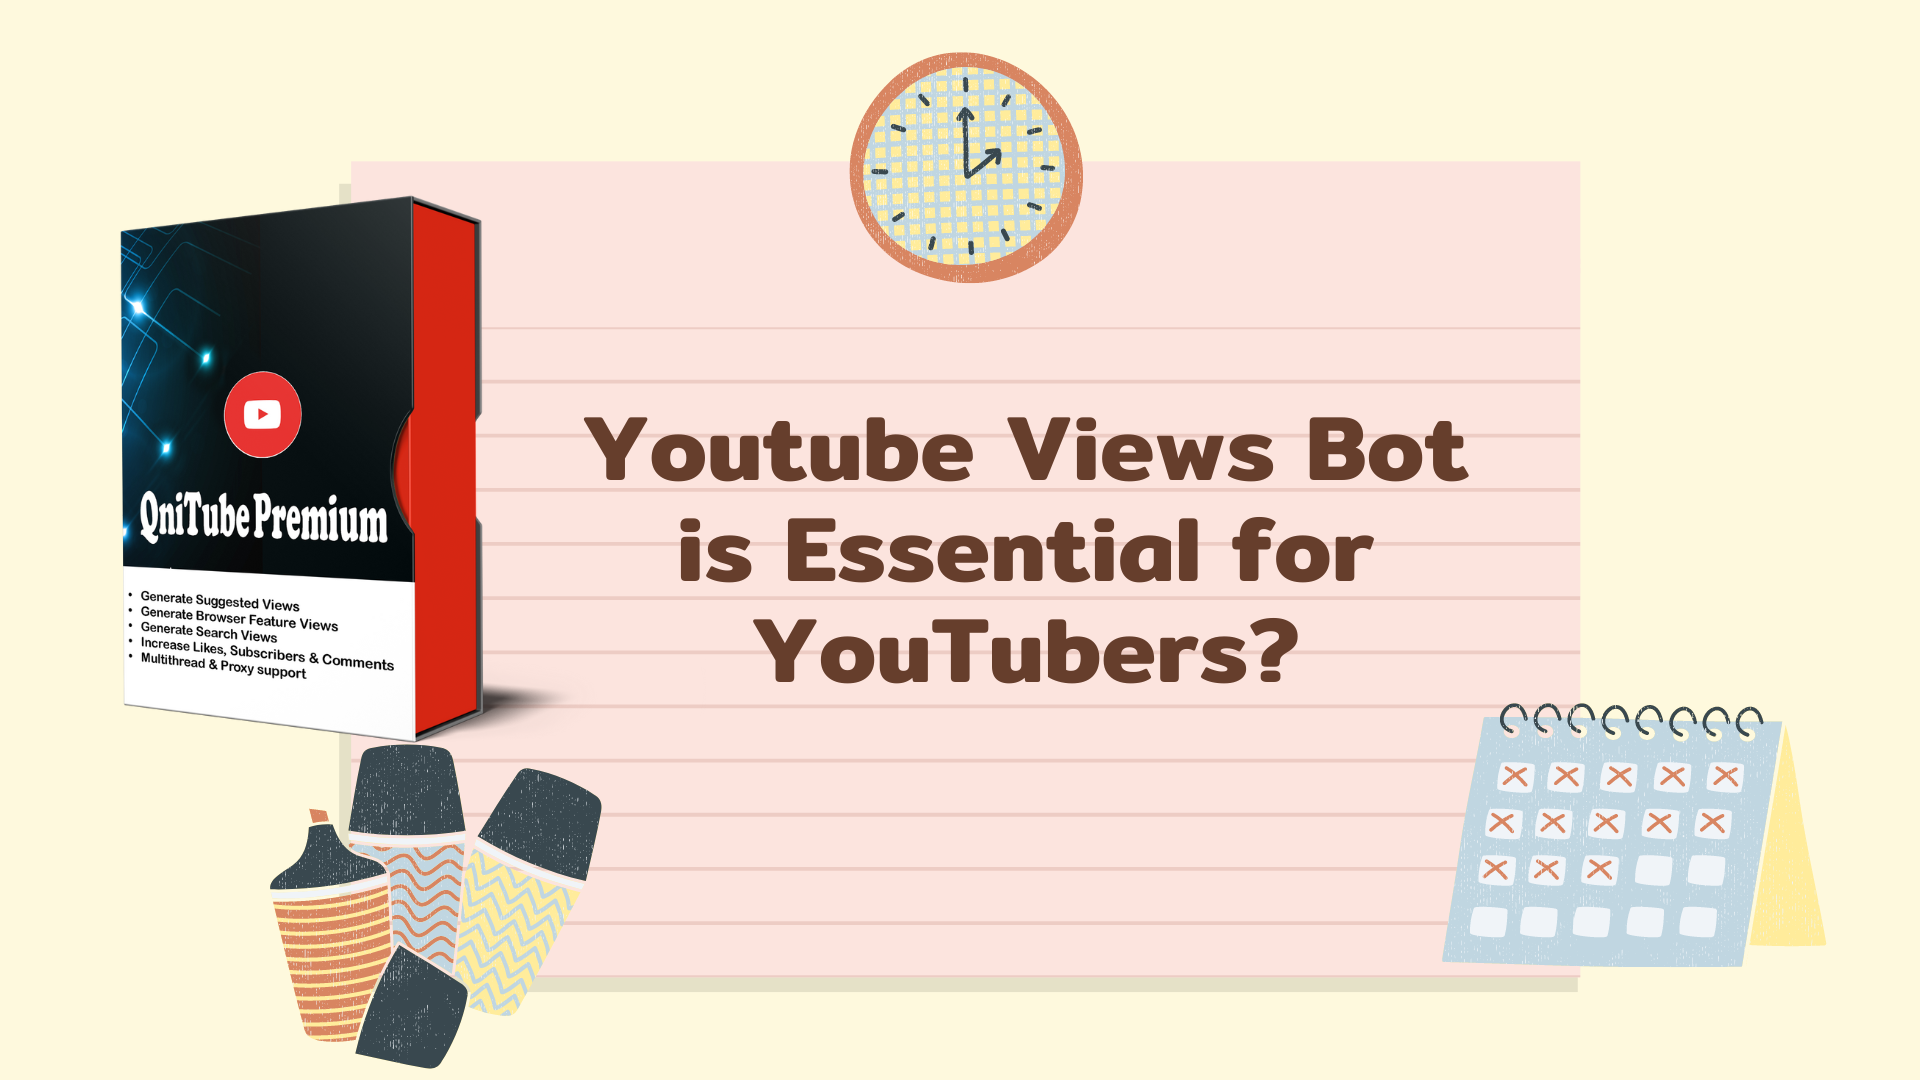 WHY DO WE NEED A YOUTUBE VIEWS SOFTWARE? IS IT ESSENTIAL FOR YOUTUBERS?